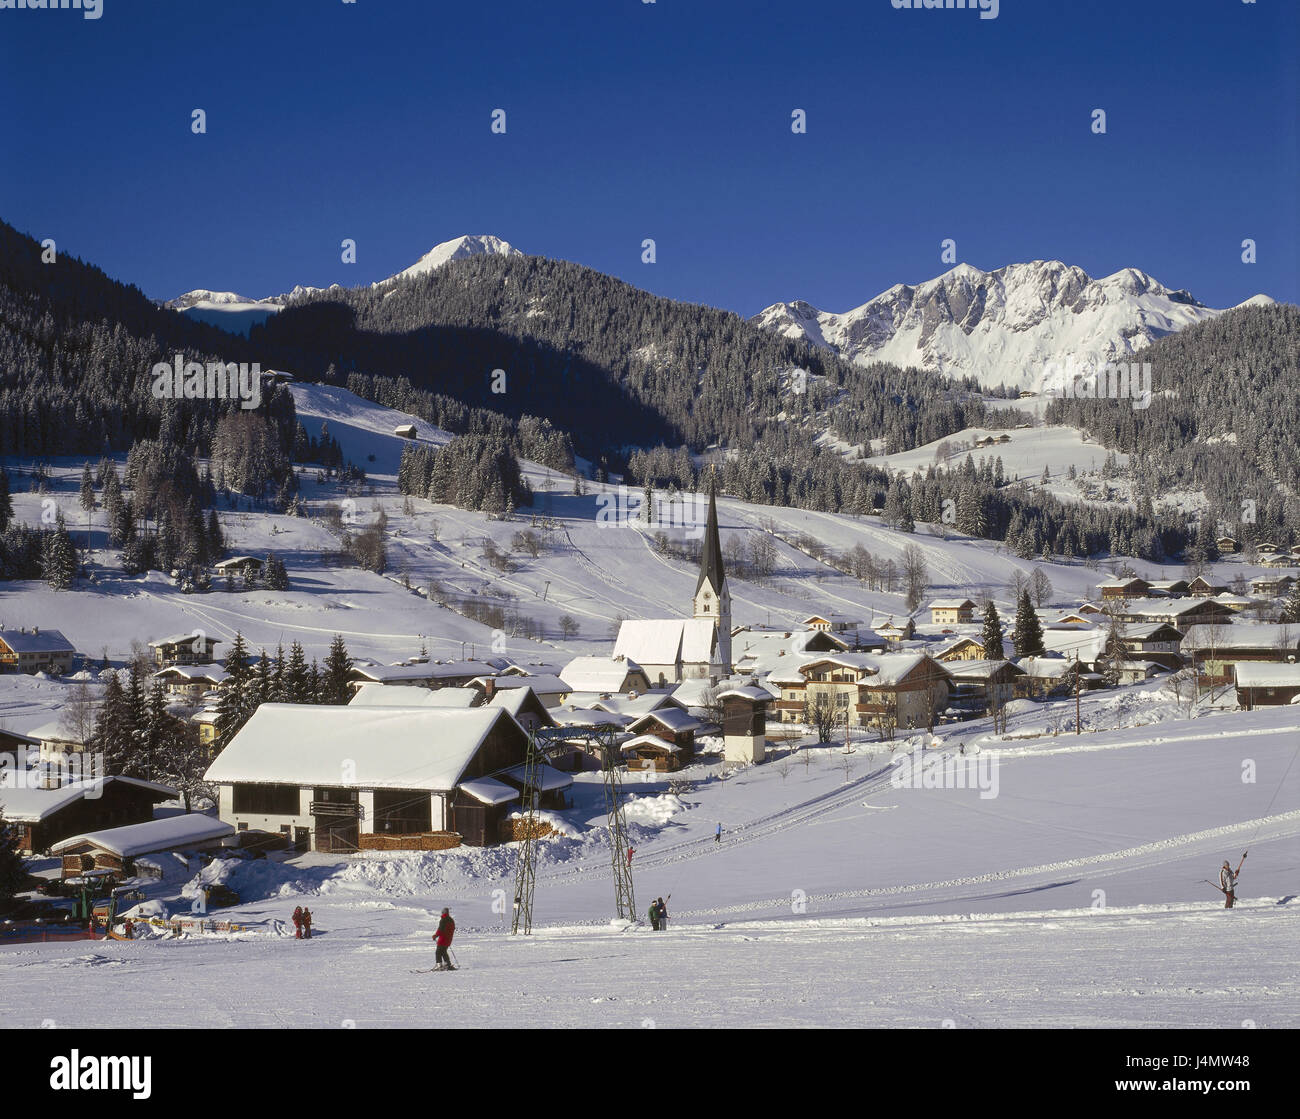 Austria, Salzburg lime alps, Tennengebirge, St. Martin, local view, snow, skier Europe, republic, alps, Eastern Alps, northern lime alps, mountains, mountains, season, winter, wintry, place, place, winter sports, winter sports place, tourism, tourist resort, departure, valley departure, ski lift, cross-country trail Stock Photo